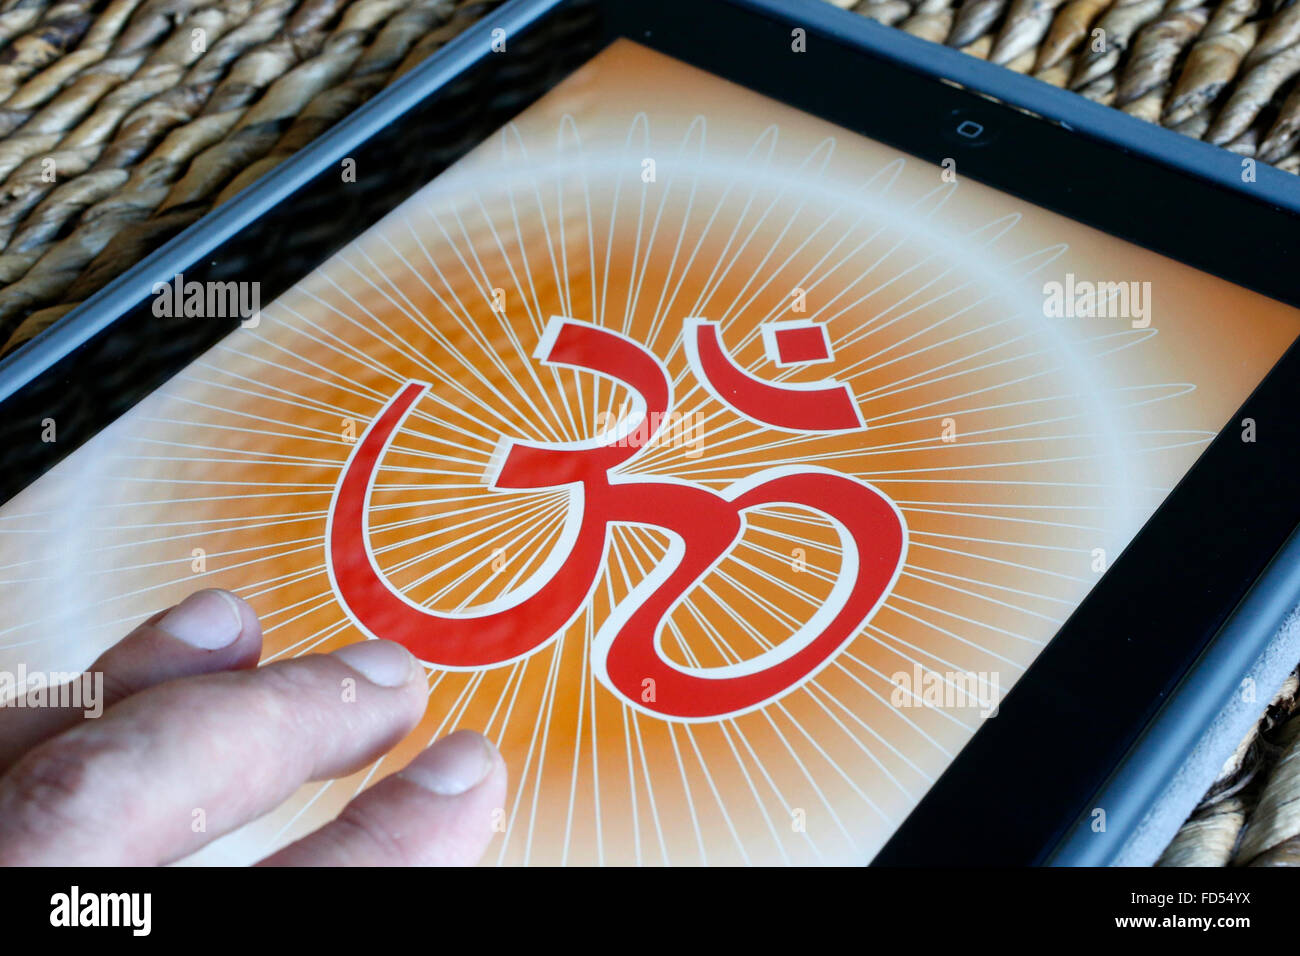 Om on an Ipad. The Om is a mantra and mystical Sanskrit syllable of Hindu origin. Stock Photo